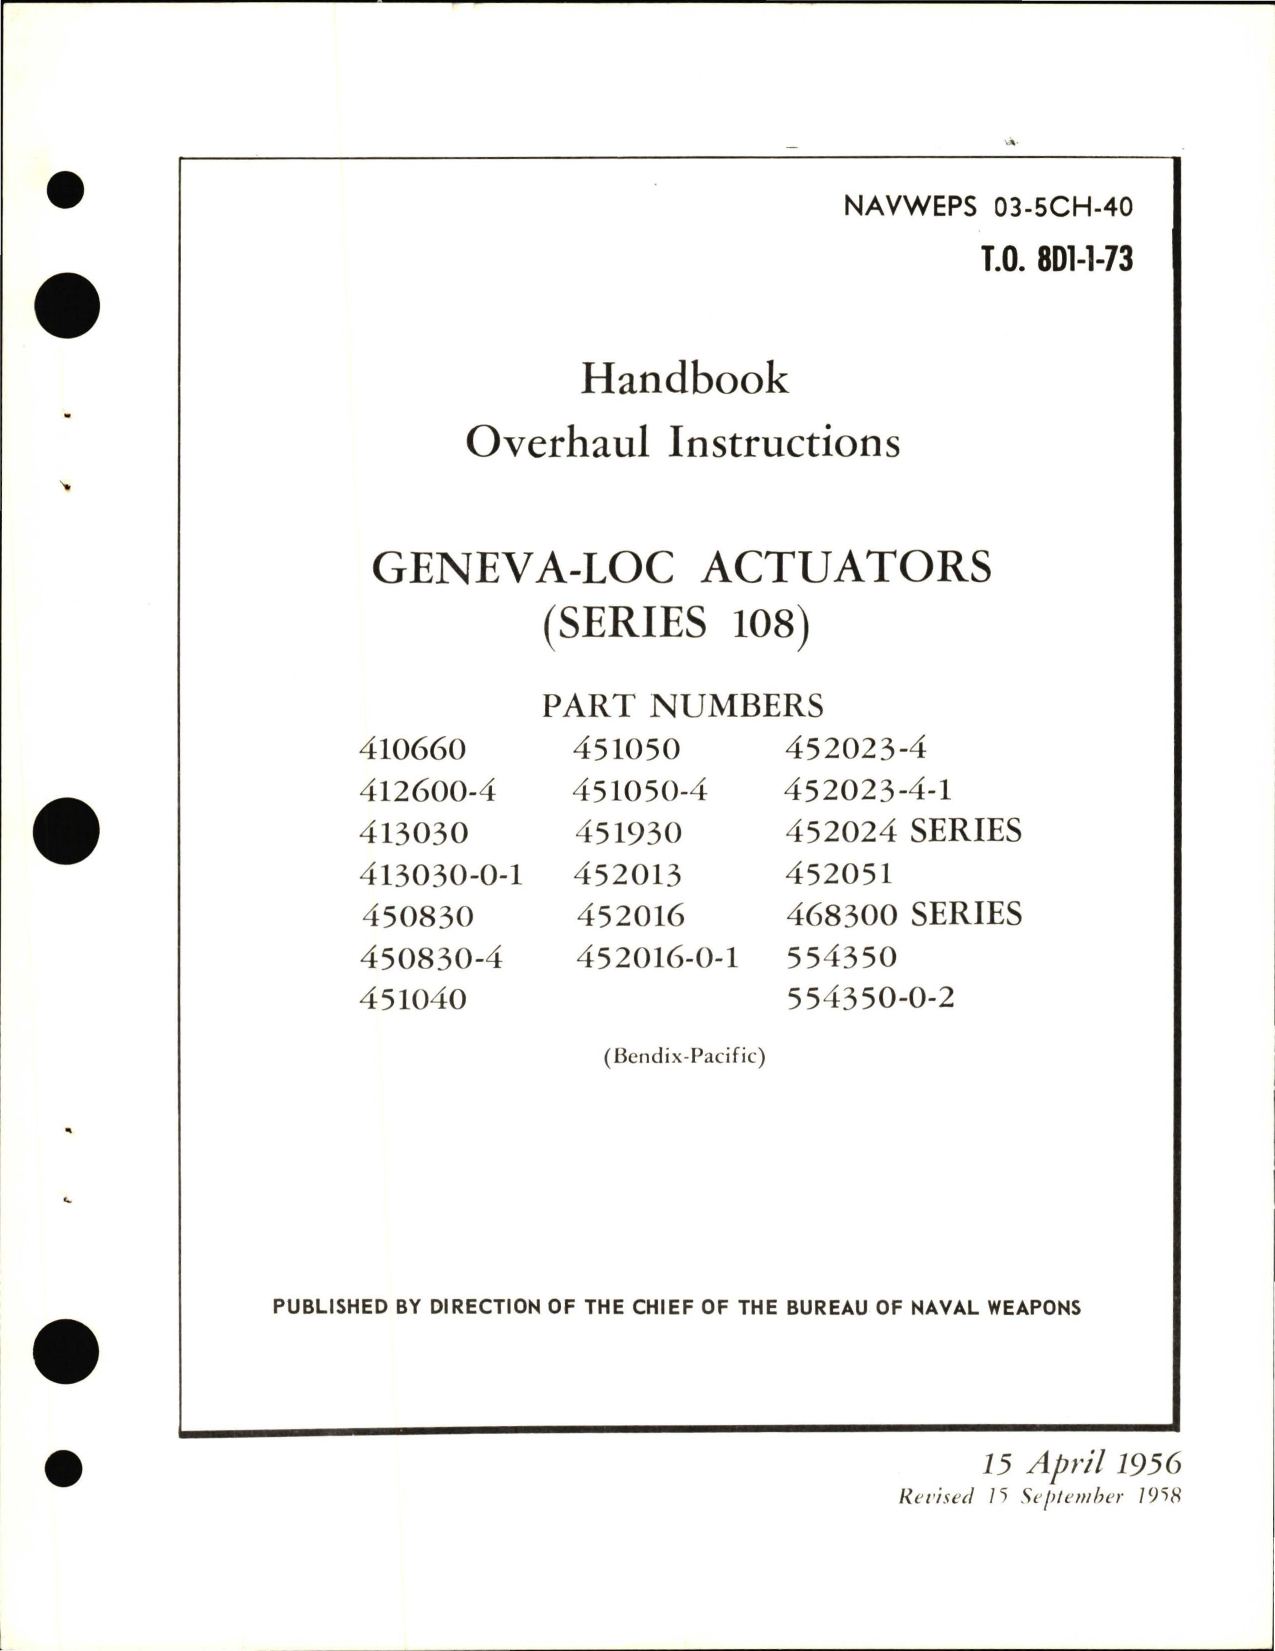 Sample page 1 from AirCorps Library document: Overhaul Instructions for Geneva-Loc Actuators - Series 108 